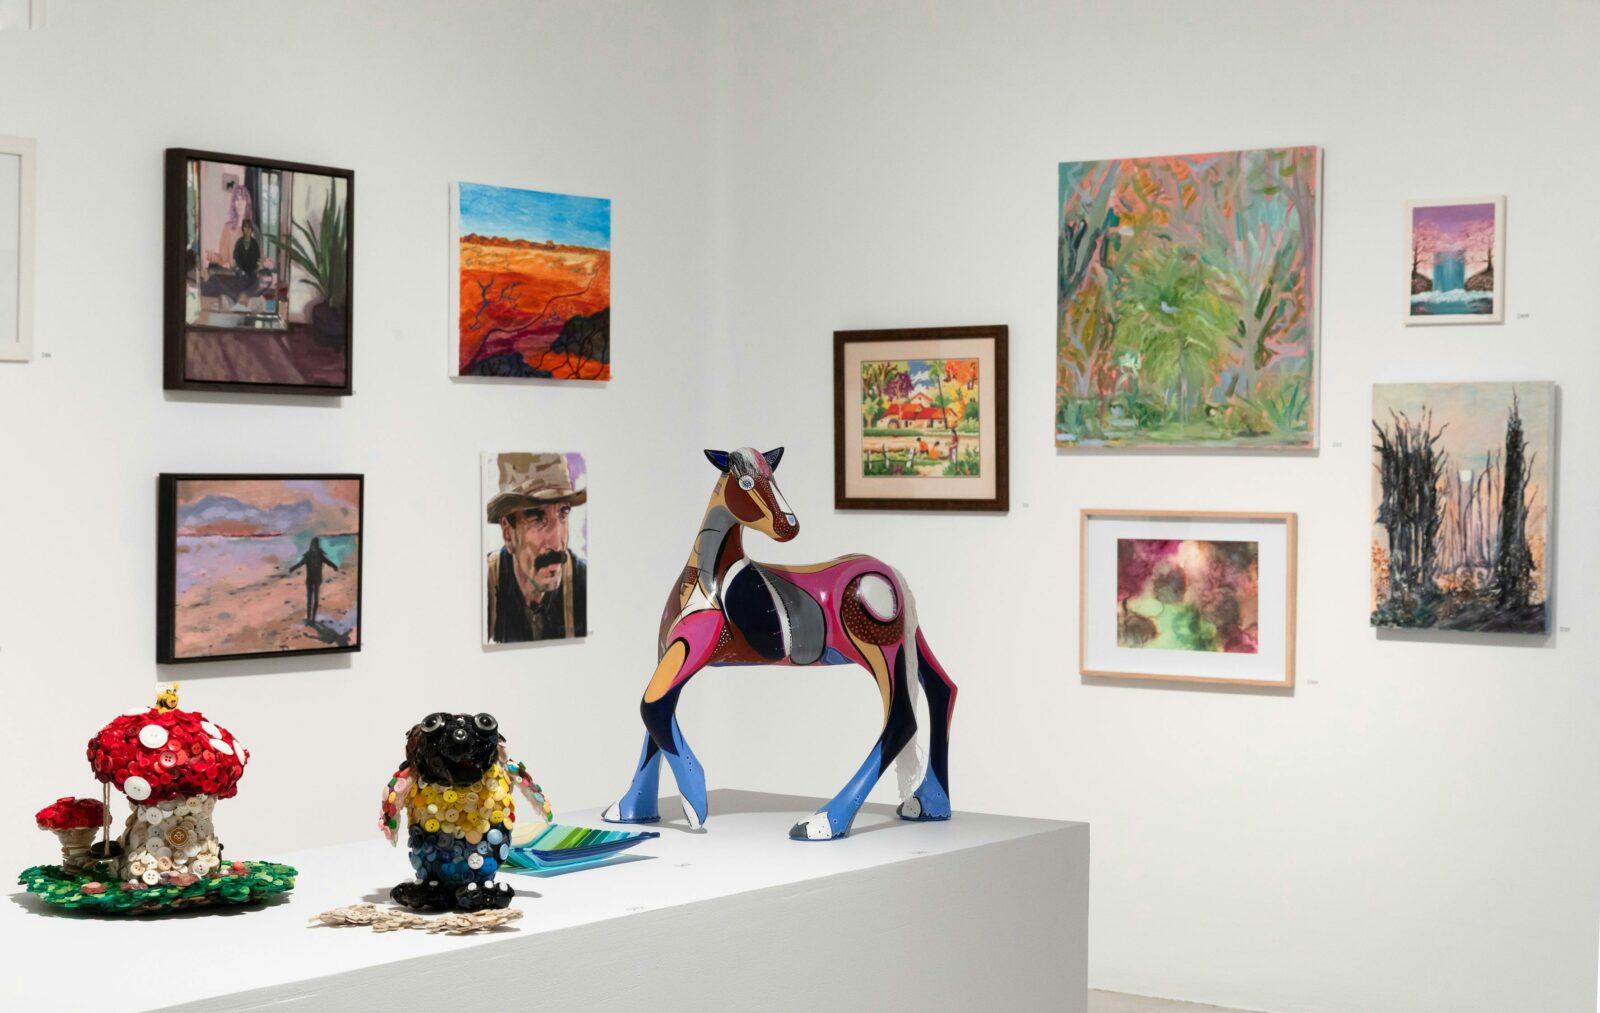 Image of various artworks in Friends exhibition, including paintings, sculptures and ceramics.